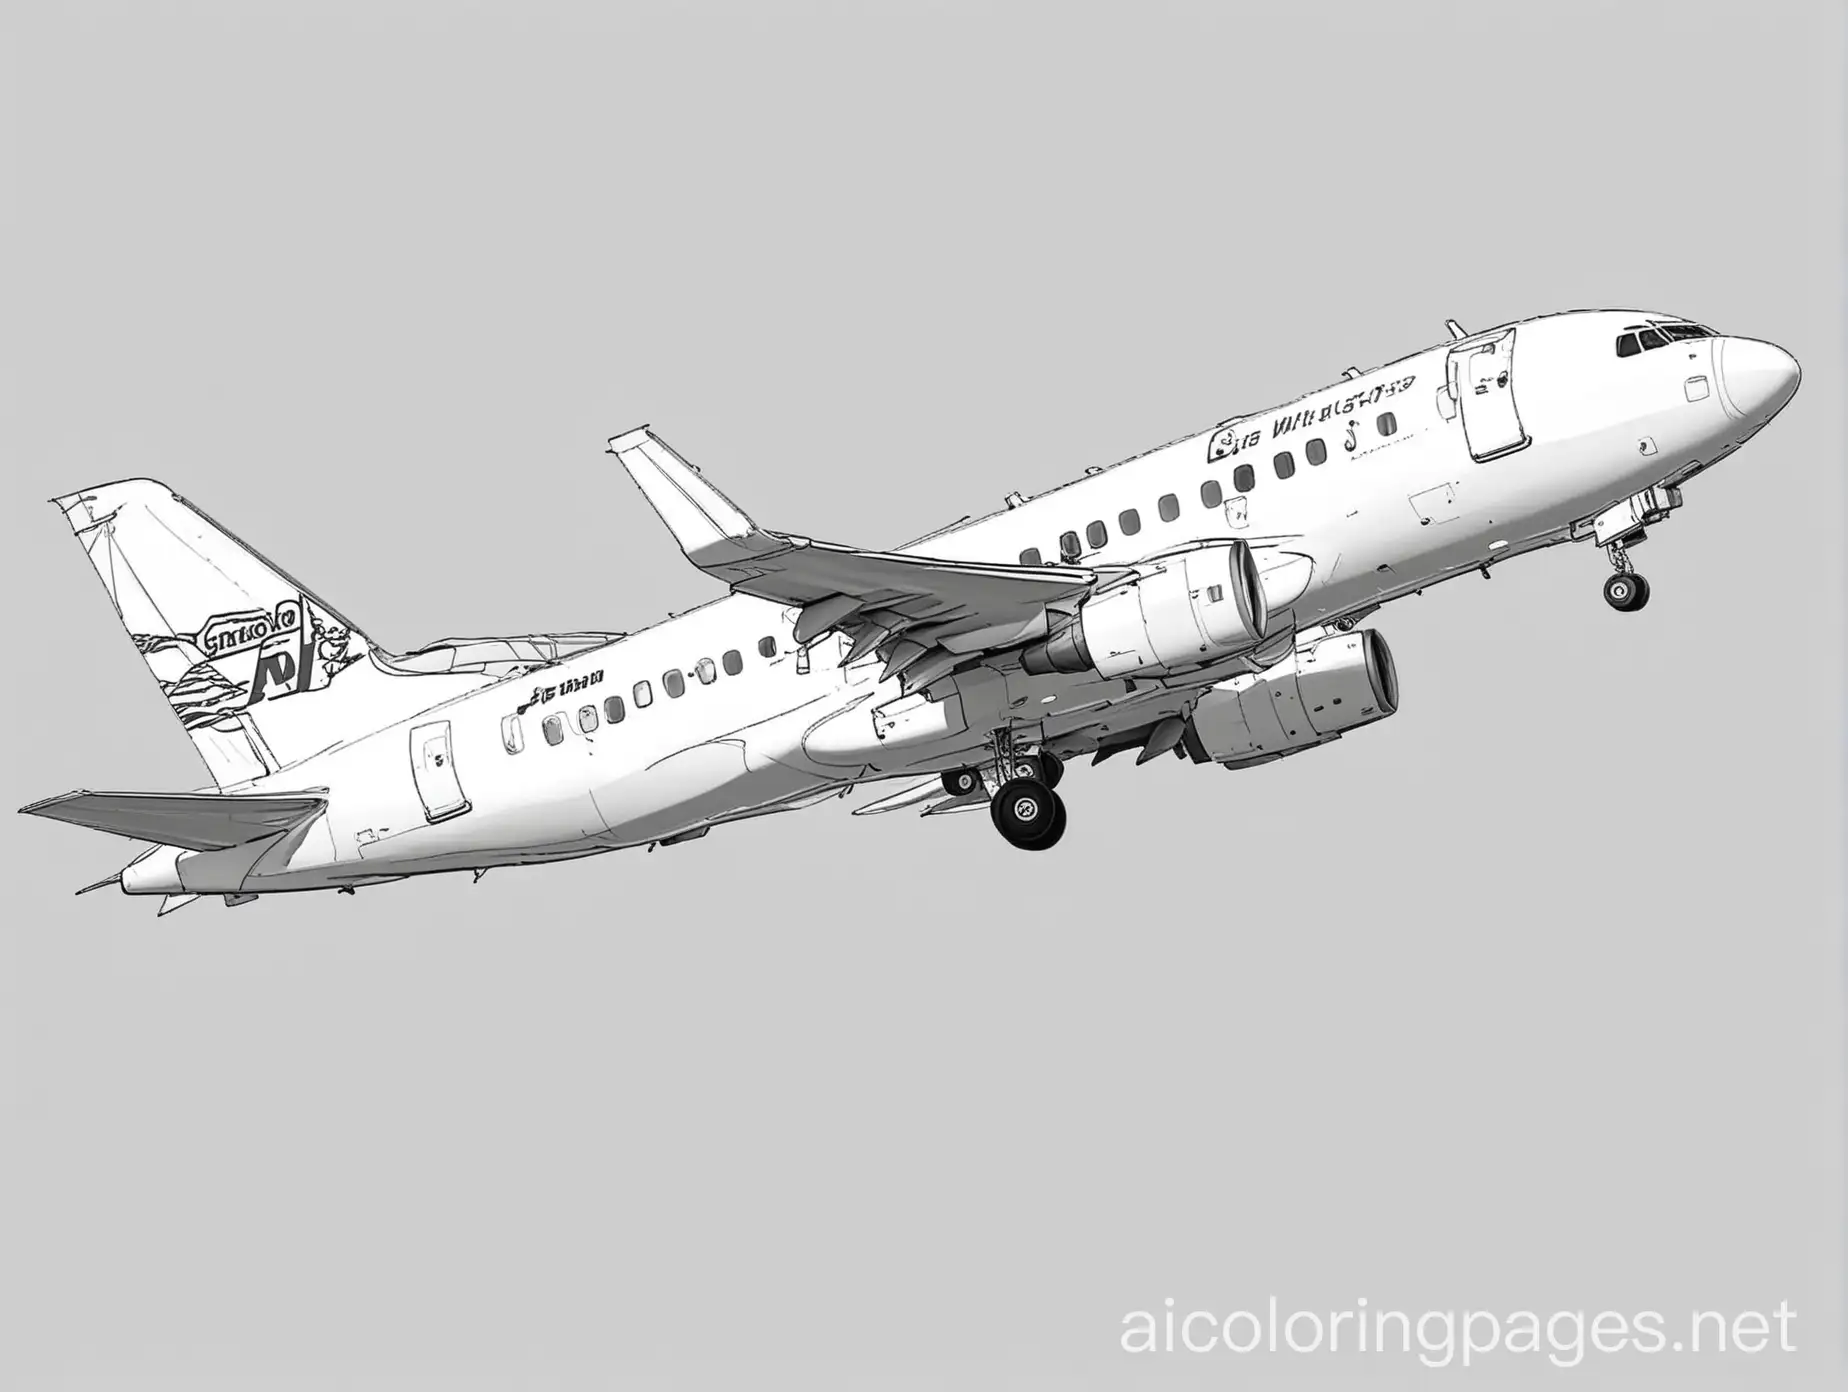 passenger airline, Coloring Page, black and white, line art, white background, Simplicity, Ample White Space. The background of the coloring page is plain white to make it easy for young children to color within the lines. The outlines of all the subjects are easy to distinguish, making it simple for kids to color without too much difficulty